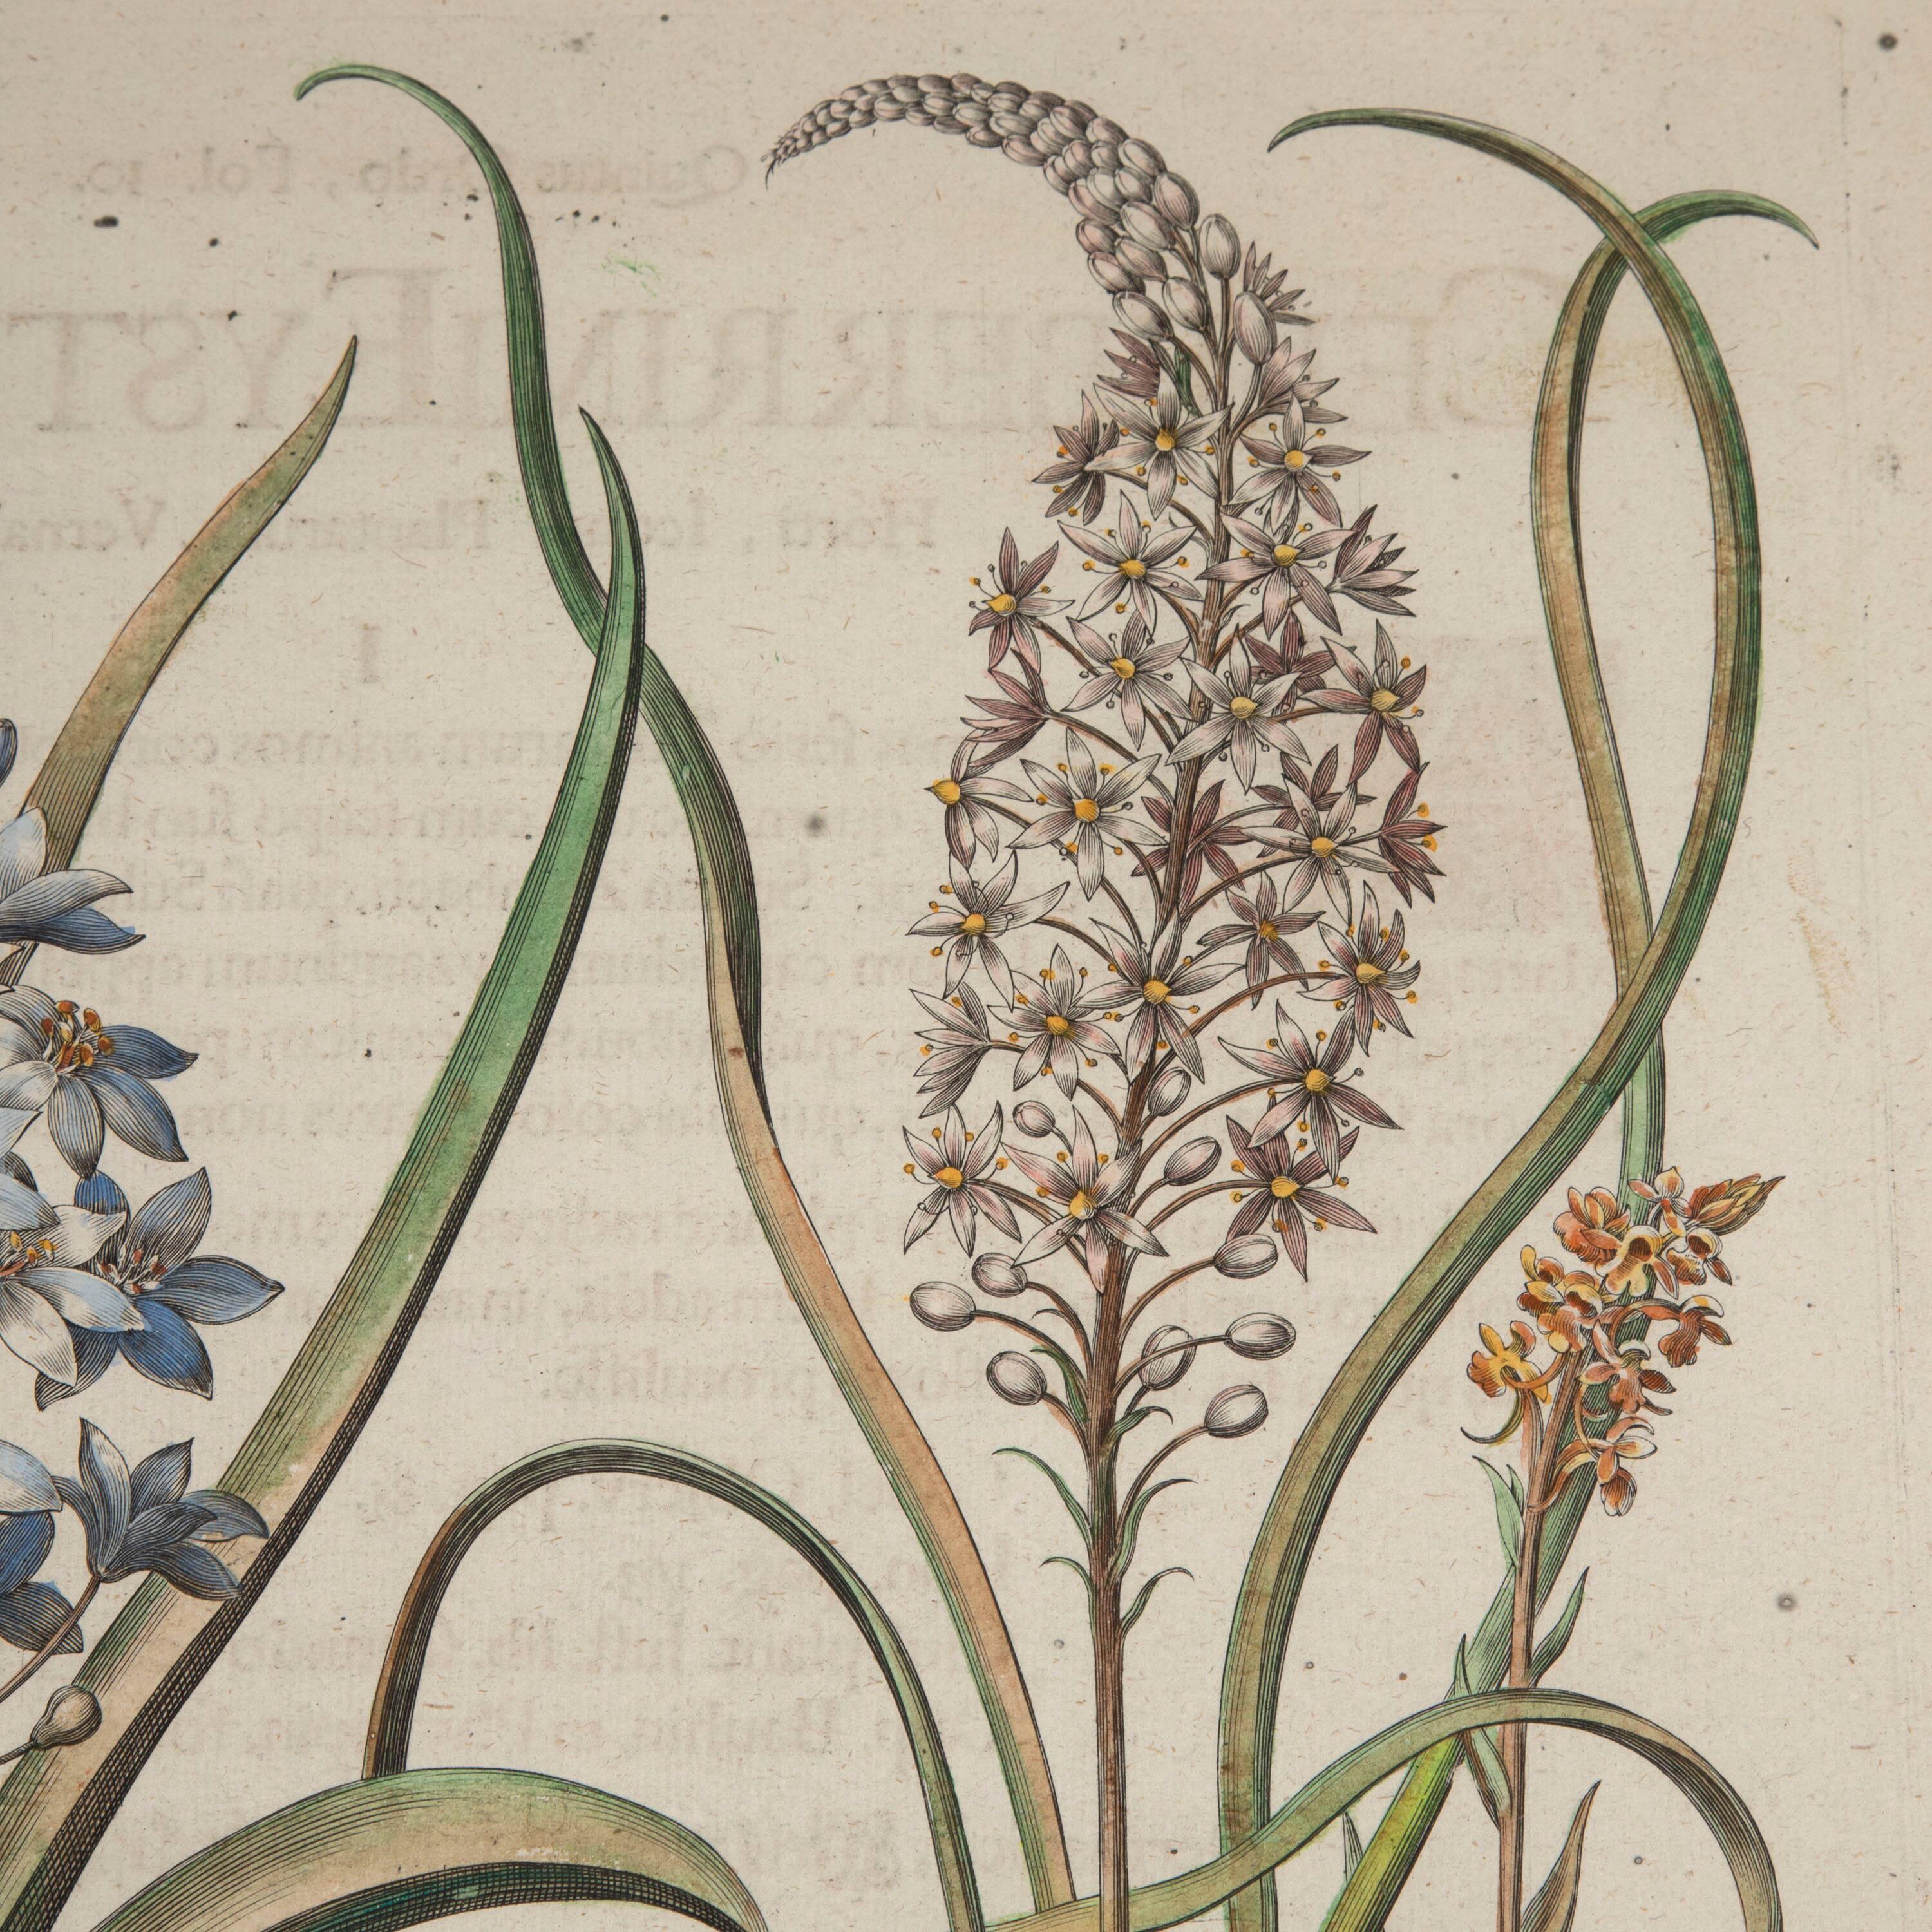 Lovely 17th century Star-of-Bethlehem botanical engraving, by Basilius Besler. 

Basilius Besler (1561-1629) was a prominent botanist and apothecarist in Nuremberg. He was tasked with curating the garden of Johann Konrad von Gemmingen, the Prince